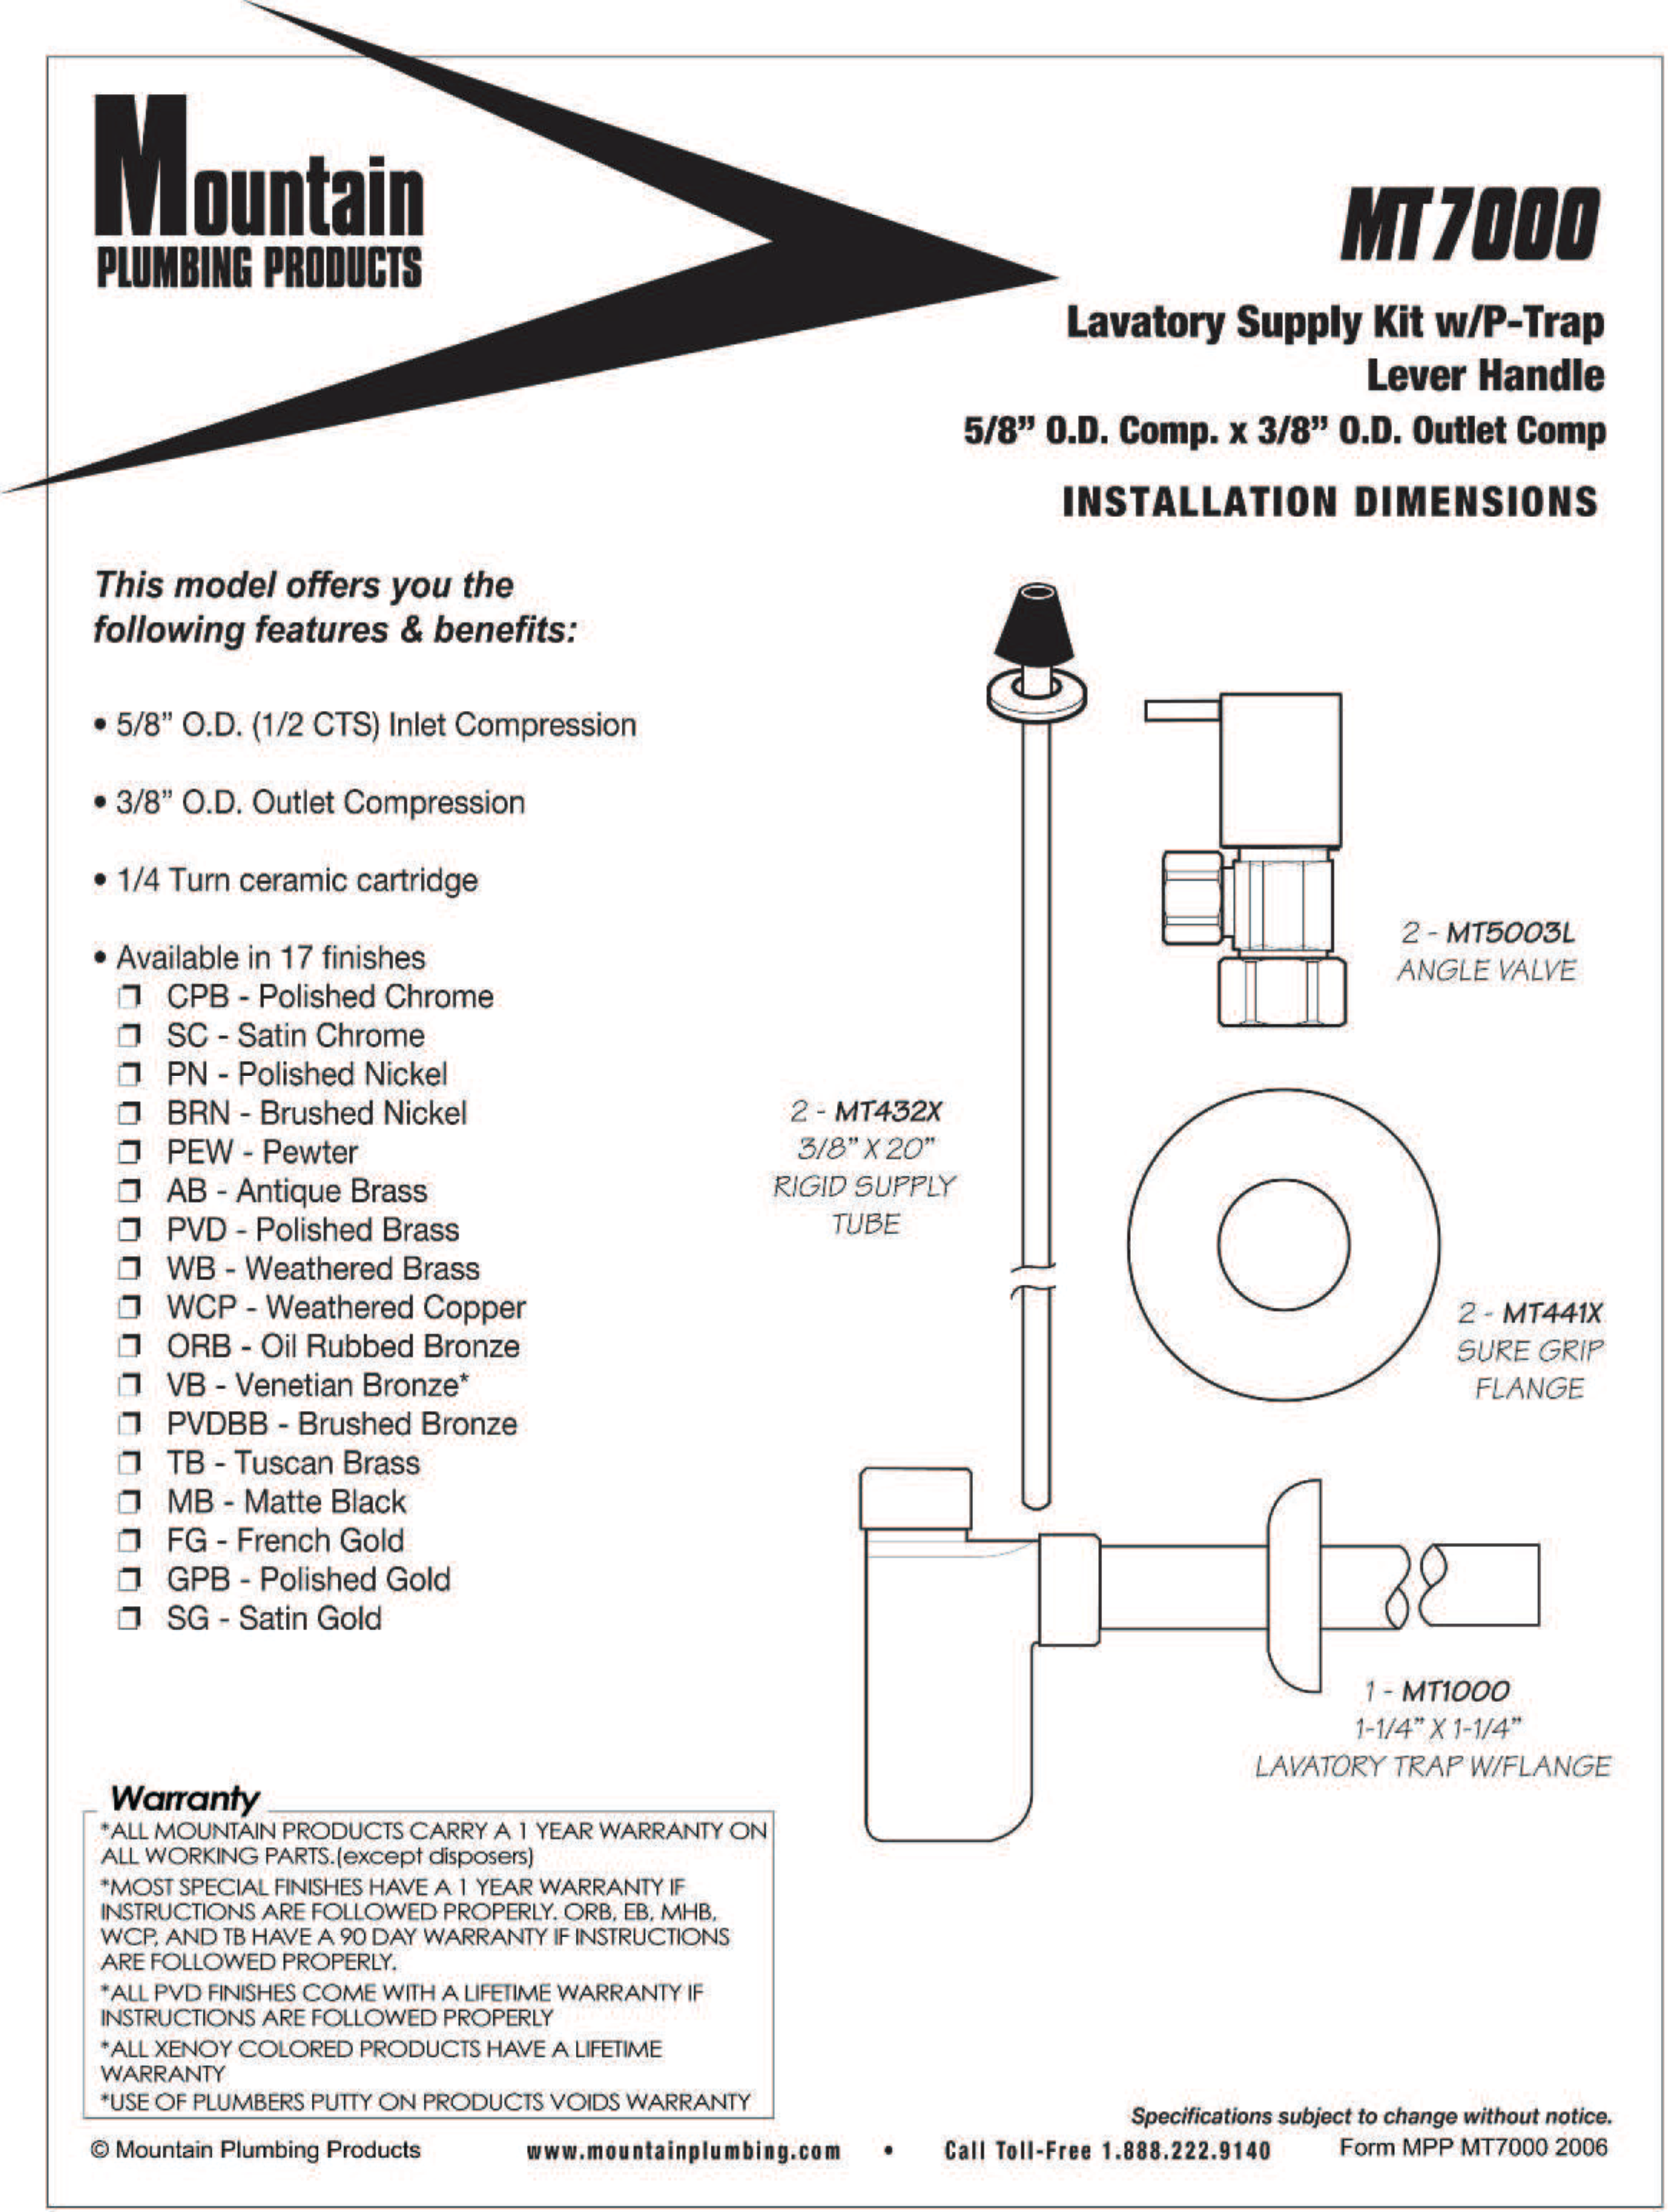 Picture of Decorative Lavatory Supply Kit w/Trap